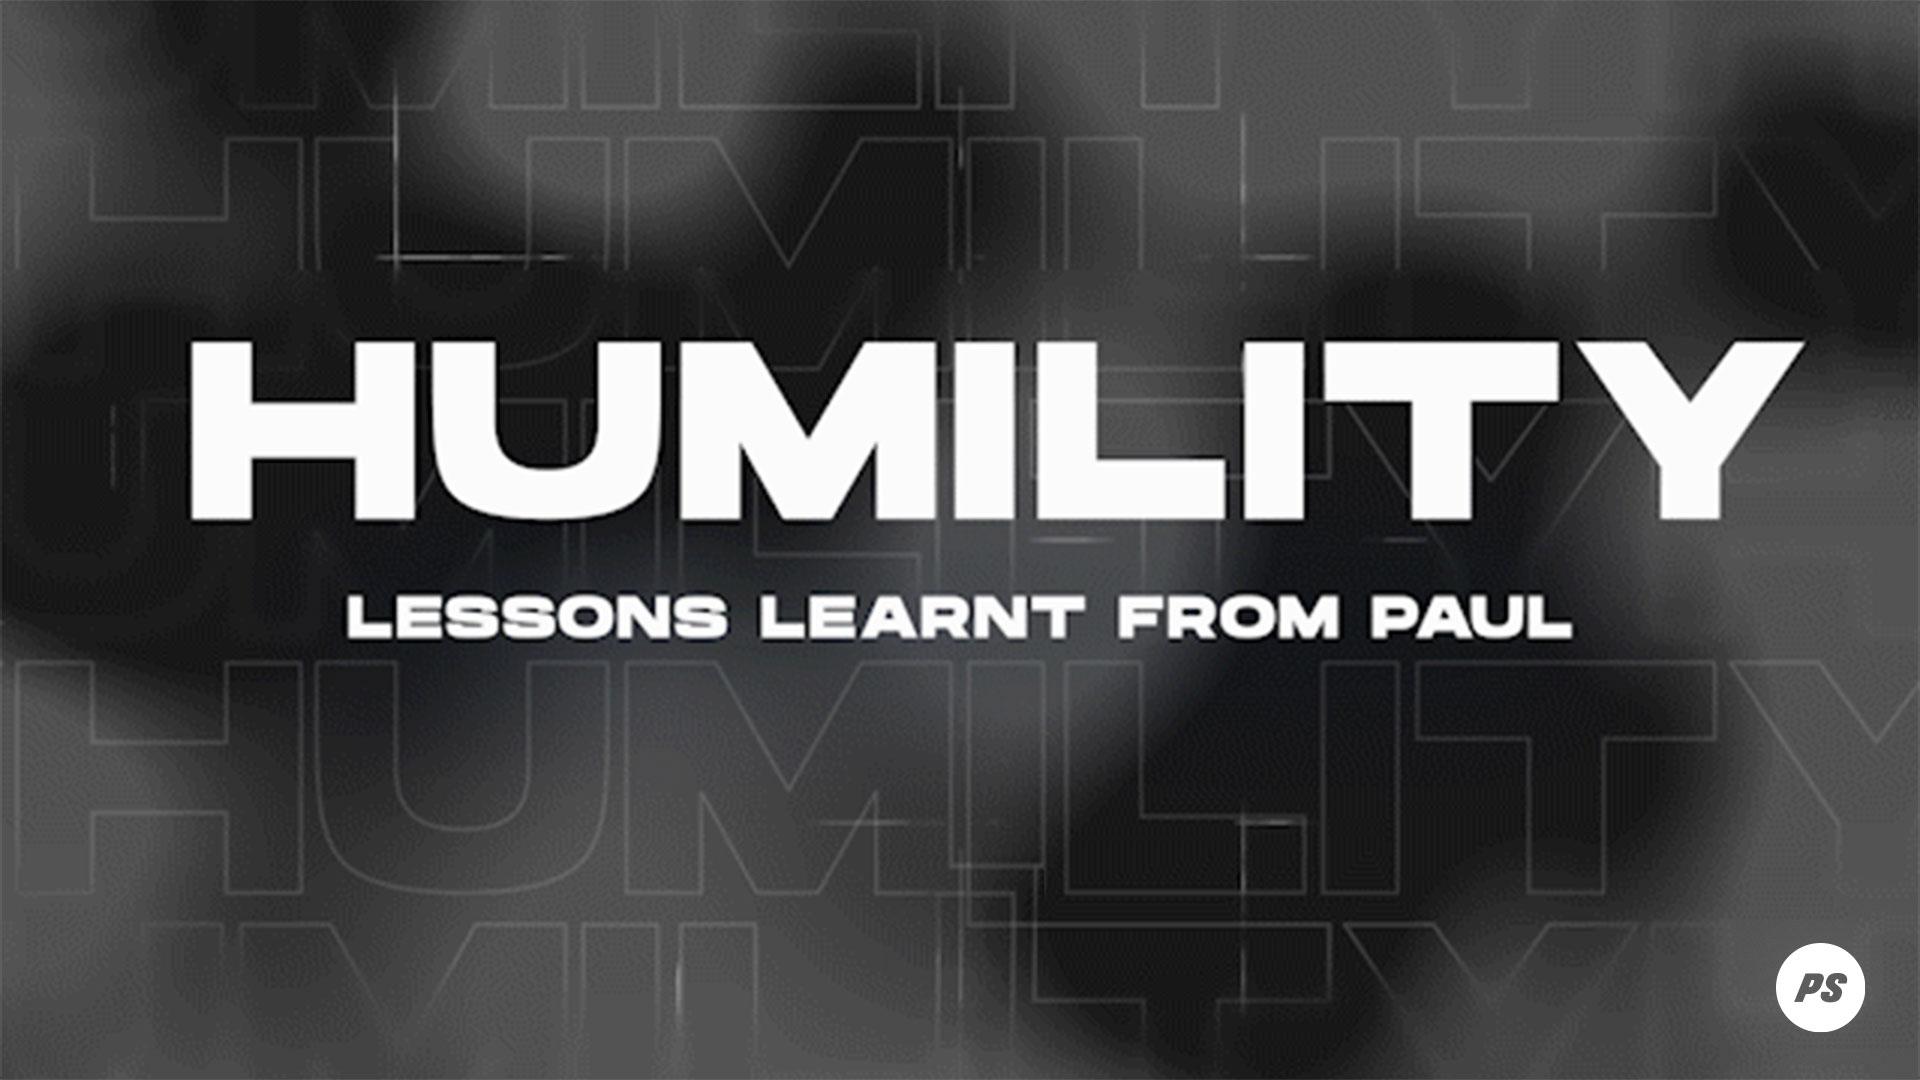 Featured Image for “Humility – Lessons learnt from Paul”